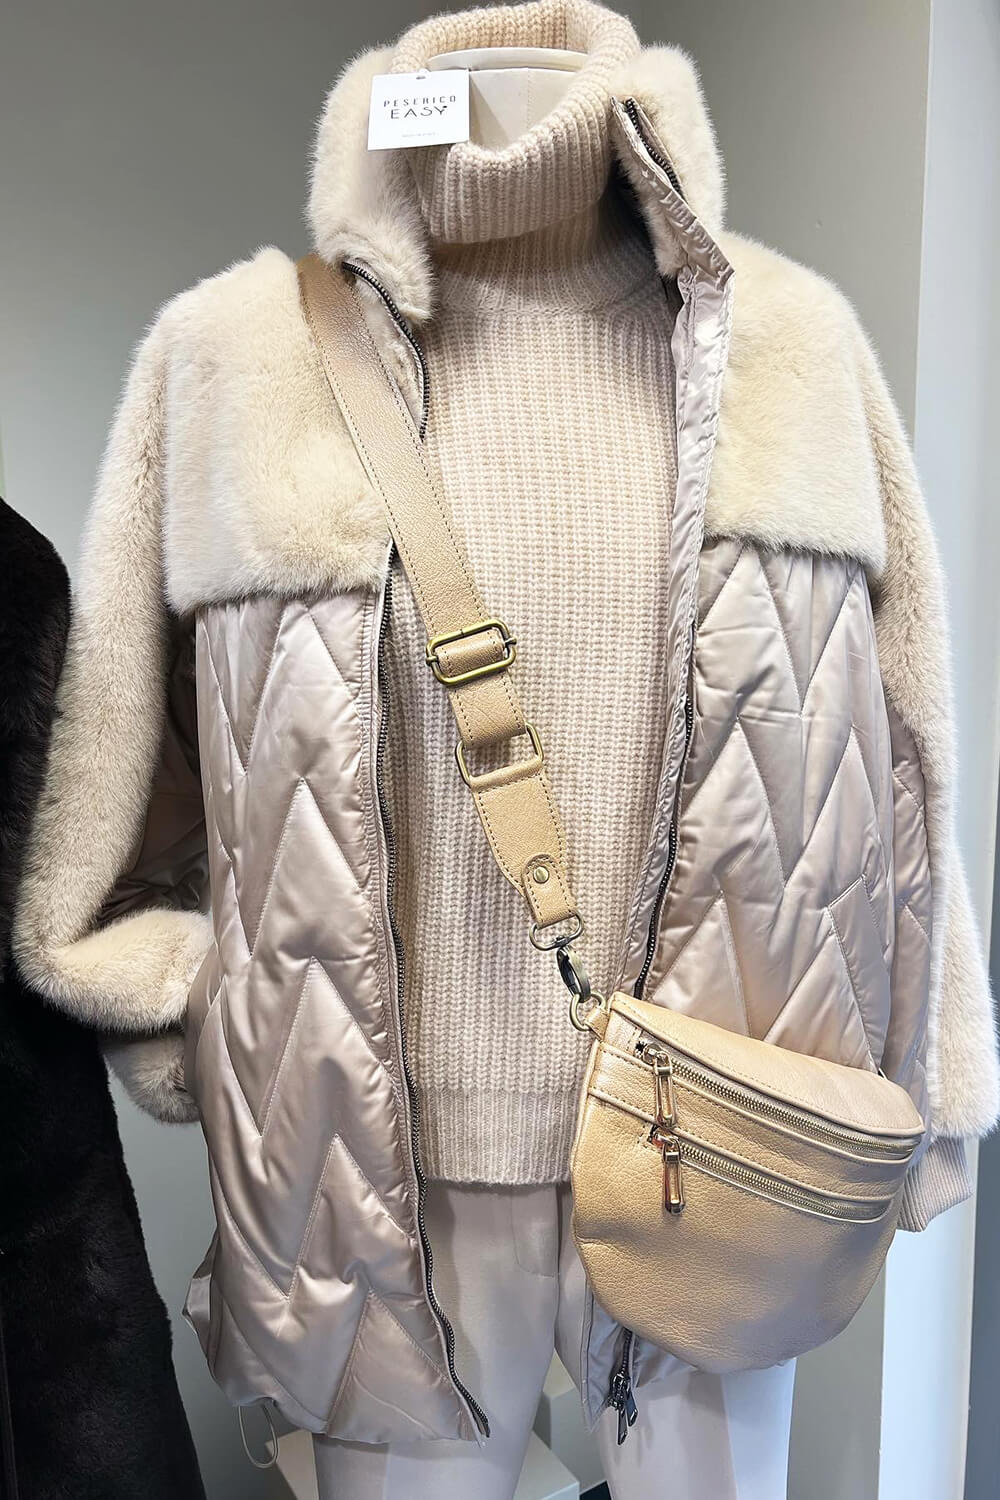 FUNK off white fake fur and puffer jacket